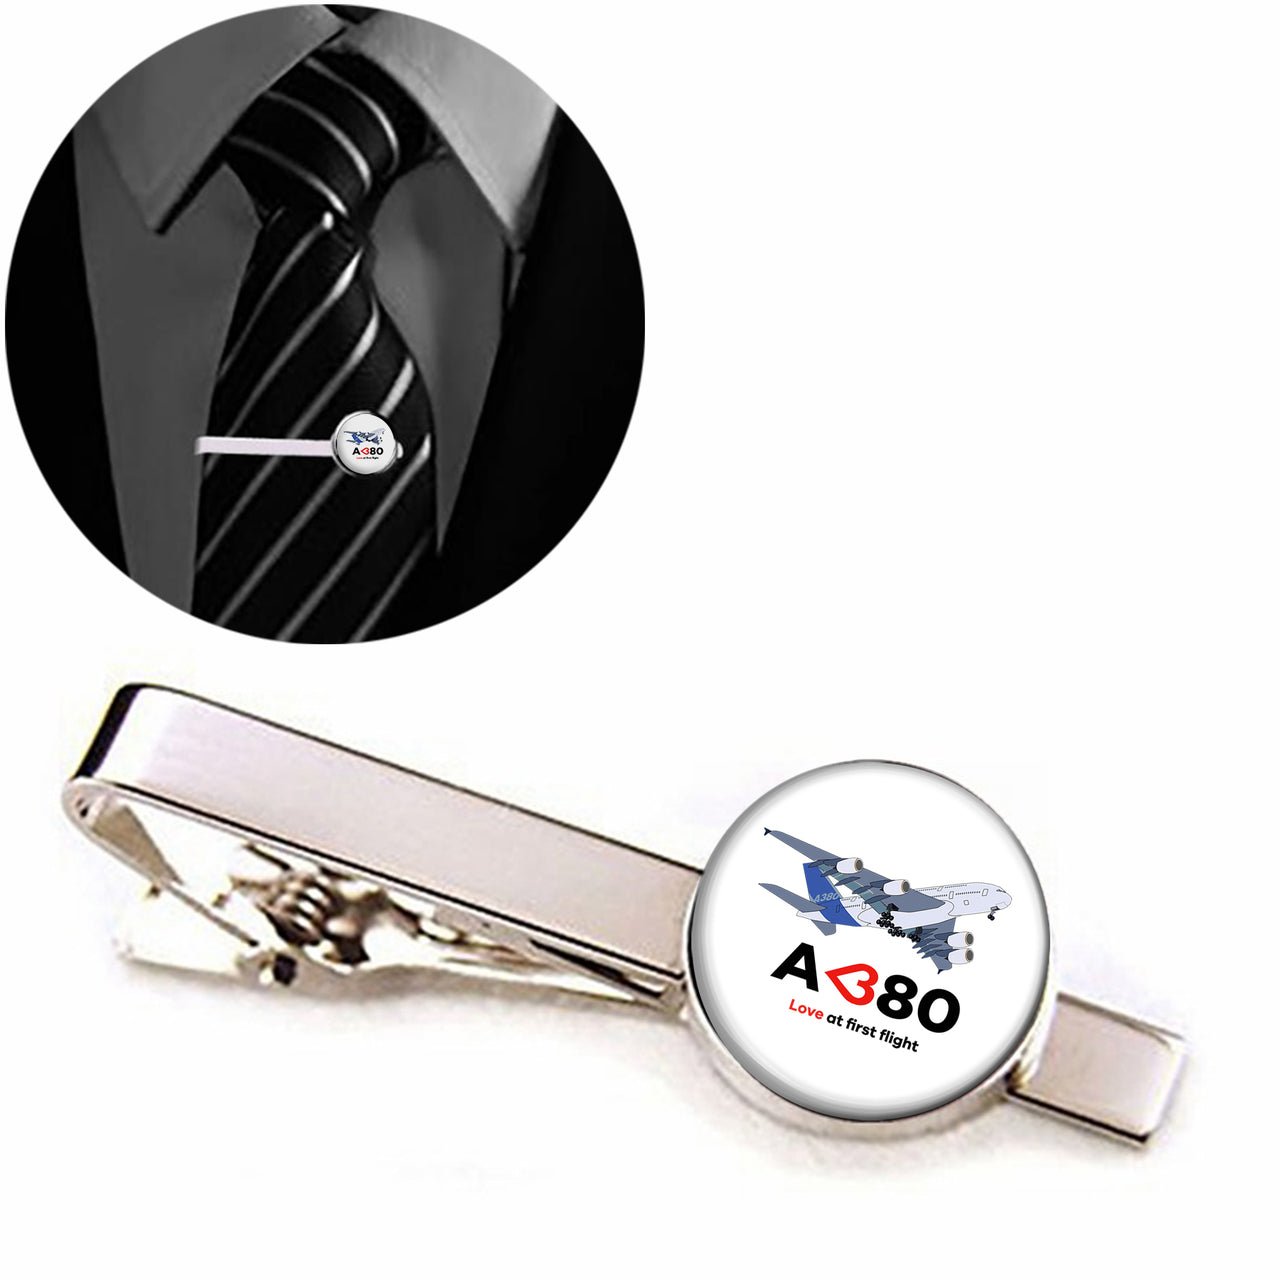 Airbus A380 Love at first flight Designed Tie Clips